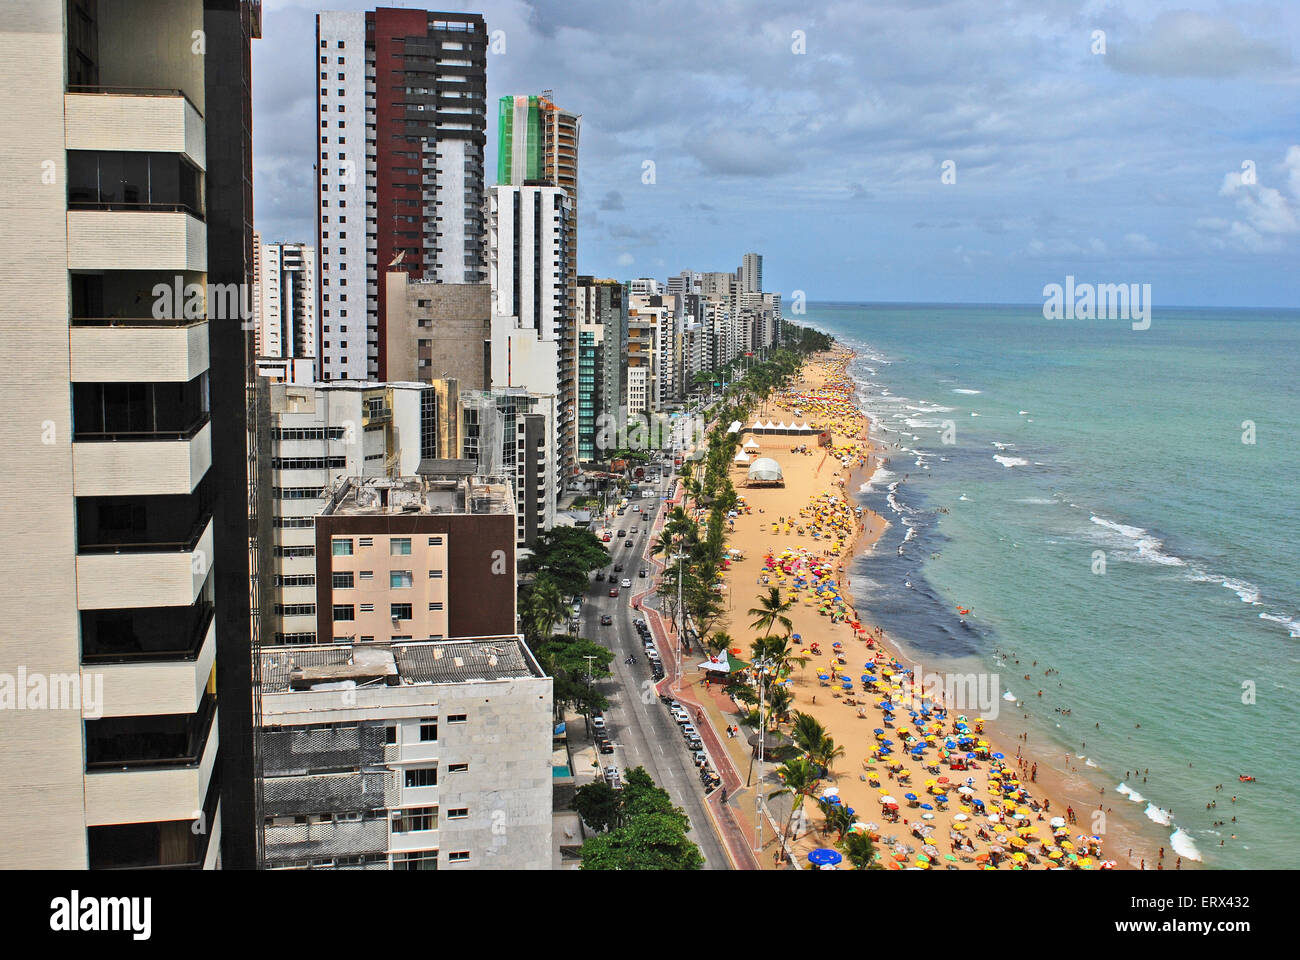 RECIFE, PERNAMBUCO, BRAZIL, SEPTEMBER 1, 2009. A view to the ocean boulevard with skyscrapers and the city beach. Stock Photo